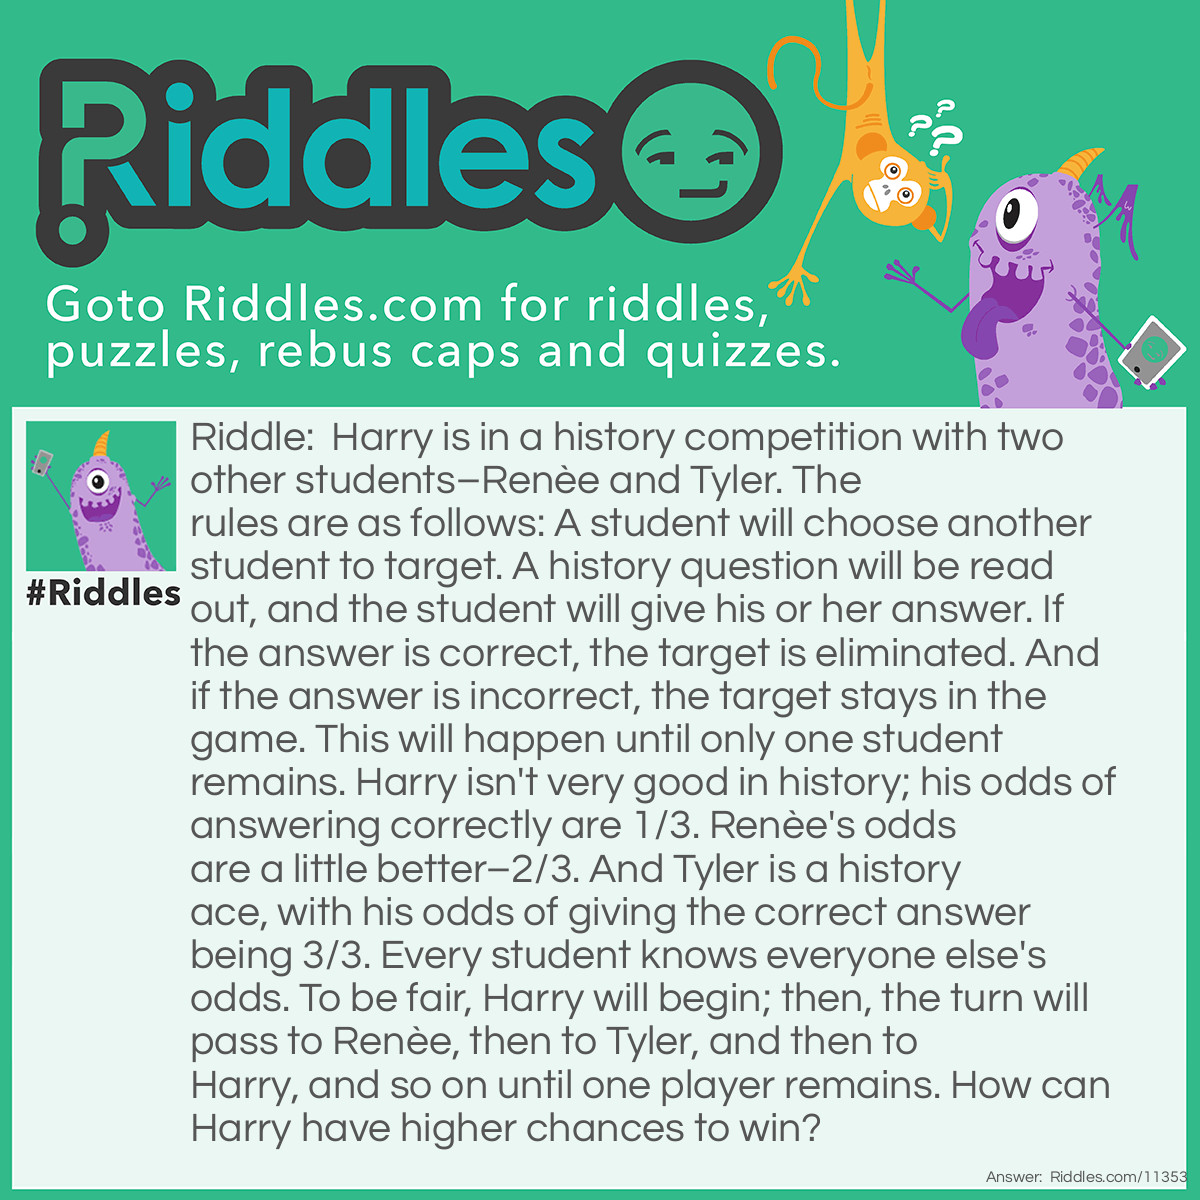 Riddle: Harry is in a history competition with two other students–Renèe and Tyler. The rules are as follows: A student will choose another student to target. A history question will be read out, and the student will give his or her answer. If the answer is correct, the target is eliminated. And if the answer is incorrect, the target stays in the game. This will happen until only one student remains. Harry isn't very good in history; his odds of answering correctly are 1/3. Renèe's odds are a little better–2/3. And Tyler is a history ace, with his odds of giving the correct answer being 3/3. Every student knows everyone else's odds. To be fair, Harry will begin; then, the turn will pass to Renèe, then to Tyler, and then to Harry, and so on until one player remains. How can Harry have higher chances to win? Answer: On Harry's first turn, he should give the incorrect answer on purpose. If he targets Renèe and manages to eliminate her, then it's just Harry and Tyler; however, Tyler will definitely eliminate Harry because HIS odds are much higher. And if Harry targets Tyler and manages to eliminate him, then it's just Harry and Renèe; however, Renèe might eliminate Harry because she has higher odds. If Harry purposefully answers incorrectly, the turn will simply move to Renèe, who will answer next. On Renèe's first turn, she will likely target Tyler because he has higher odds than her. If she manages to eliminate him, then it's just Harry and Renèe. Harry will be going first with his shot at winning the competition. If Renèe doesn't eliminate Tyler, then it will be HIS turn; Tyler will target Renèe and eliminate her for sure due to his odds being higher than hers. Although Harry will have to go against Tyler in the end, it's still a fair situation because Harry will still be going first with a chance to win.